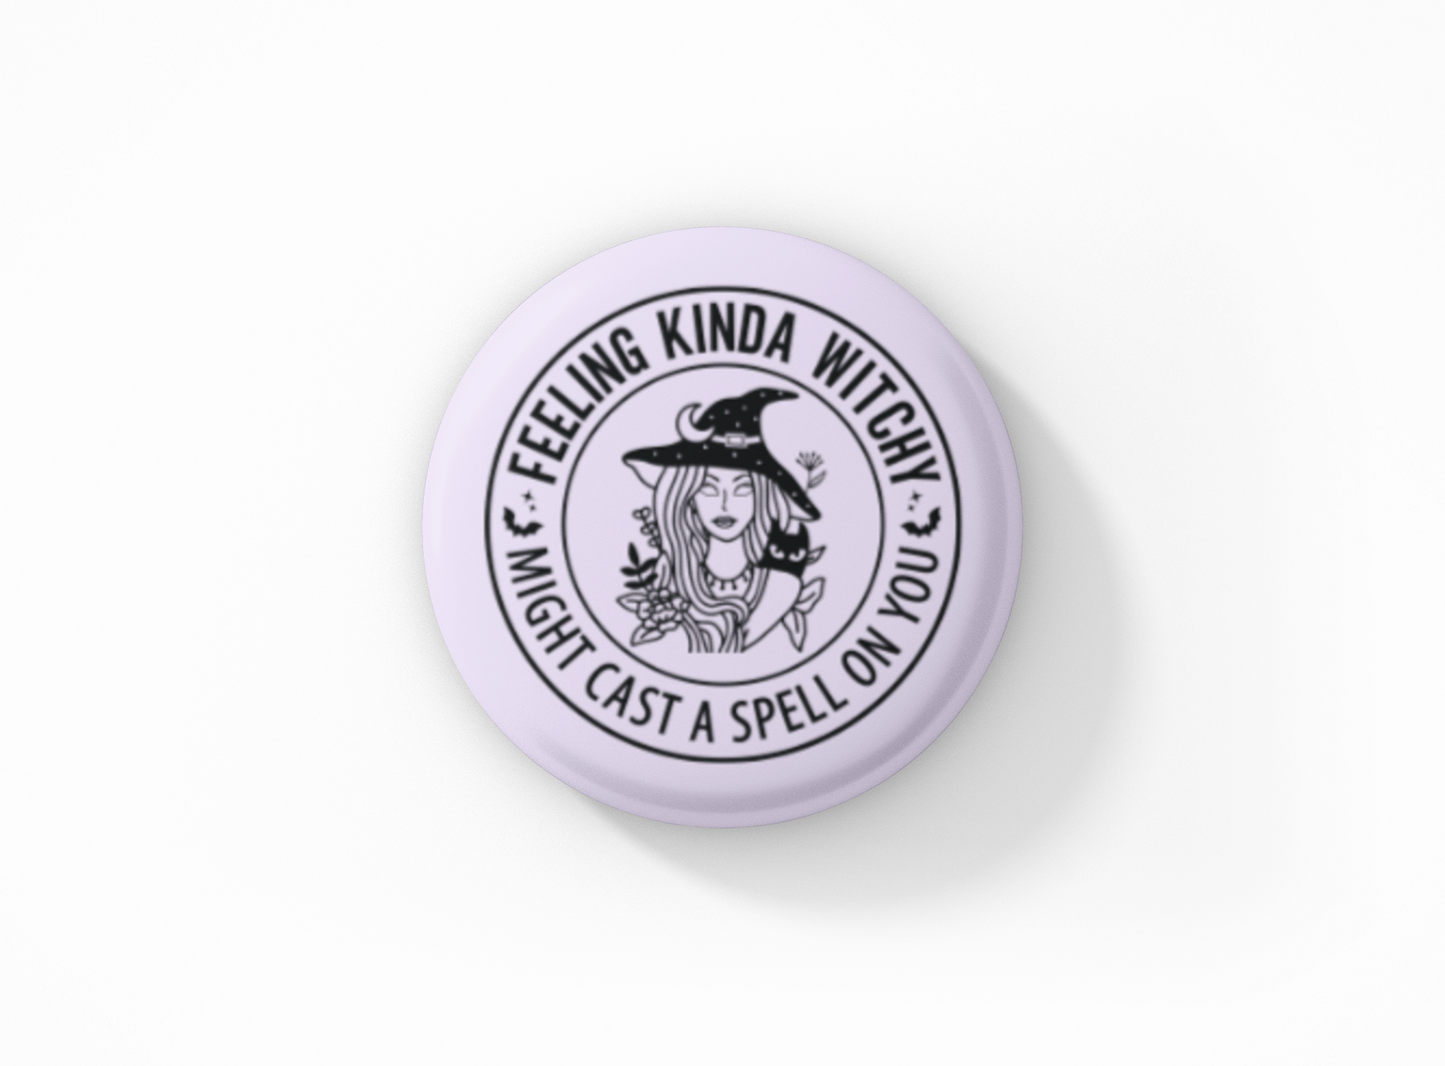 Feeling Kinda Witchy Pinback Button